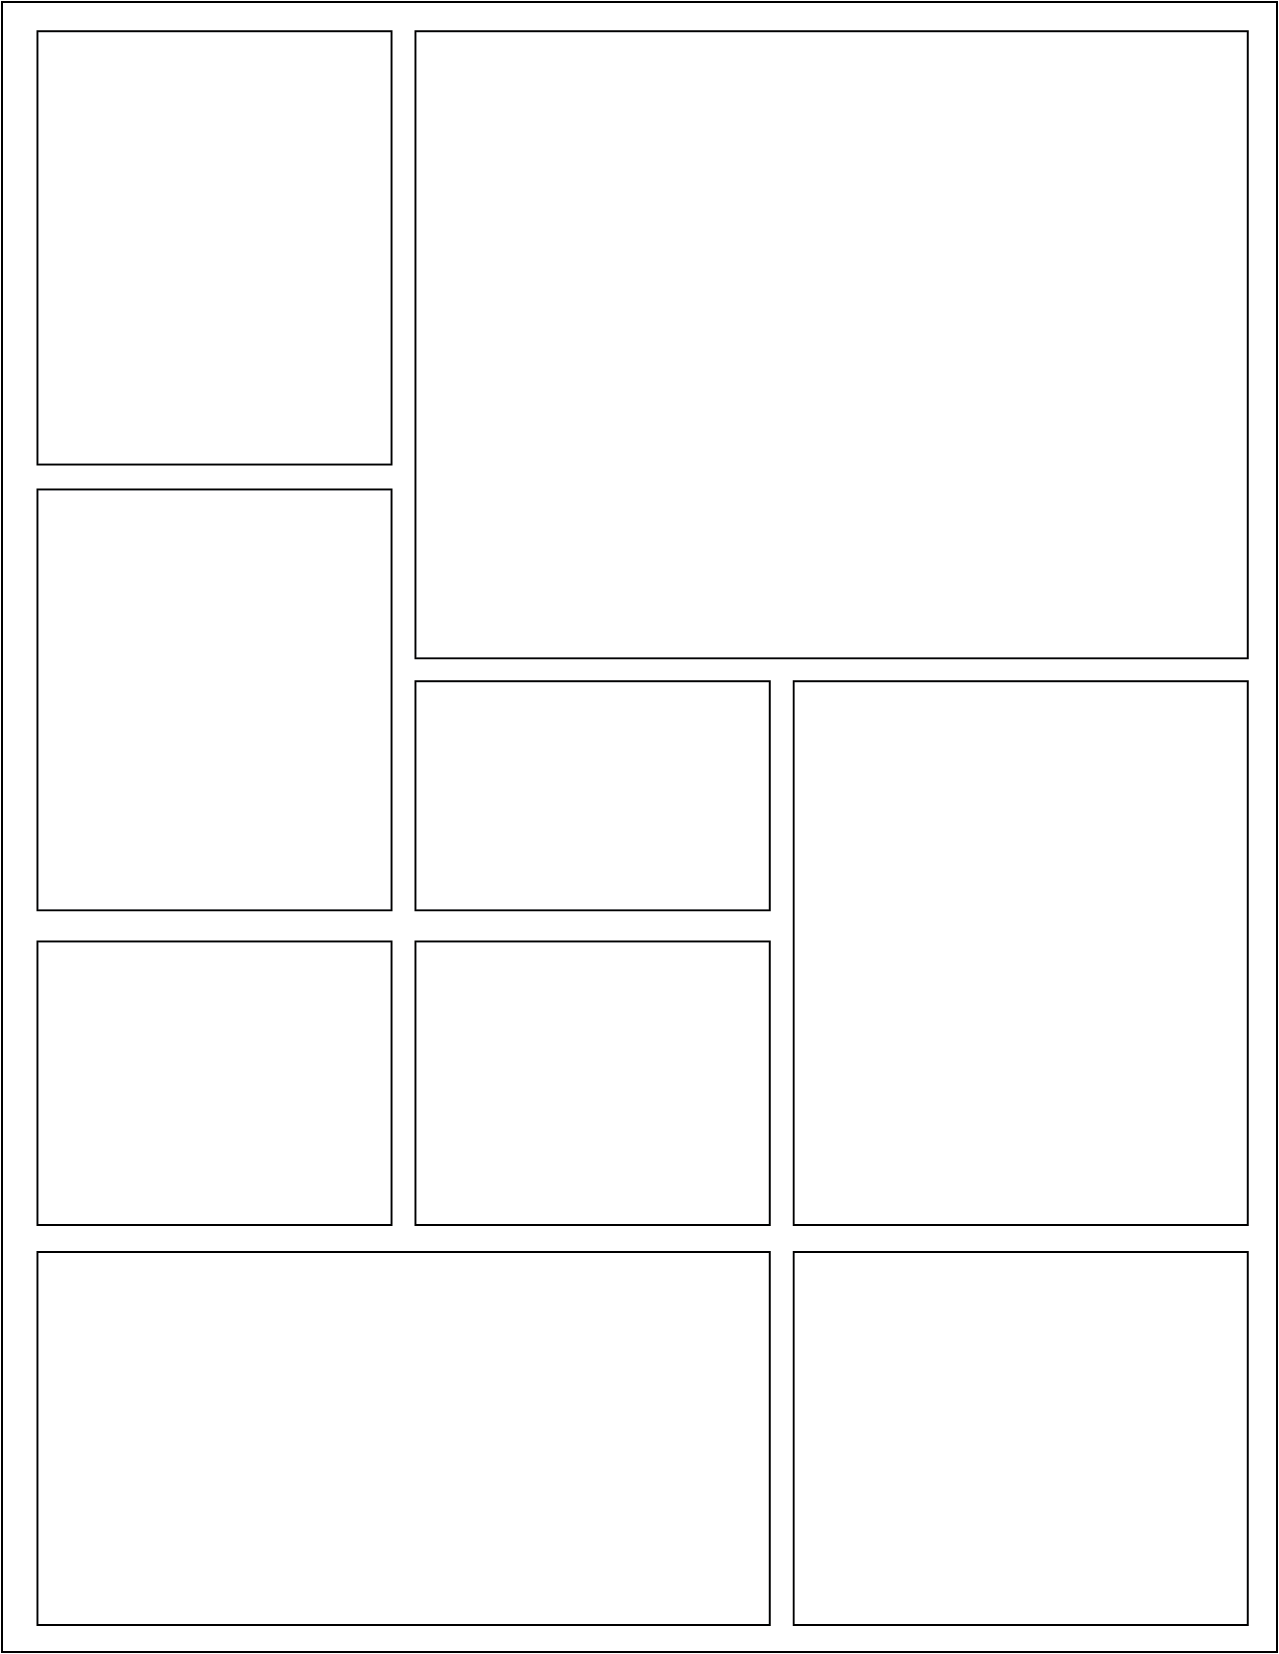 Graphic Novel template